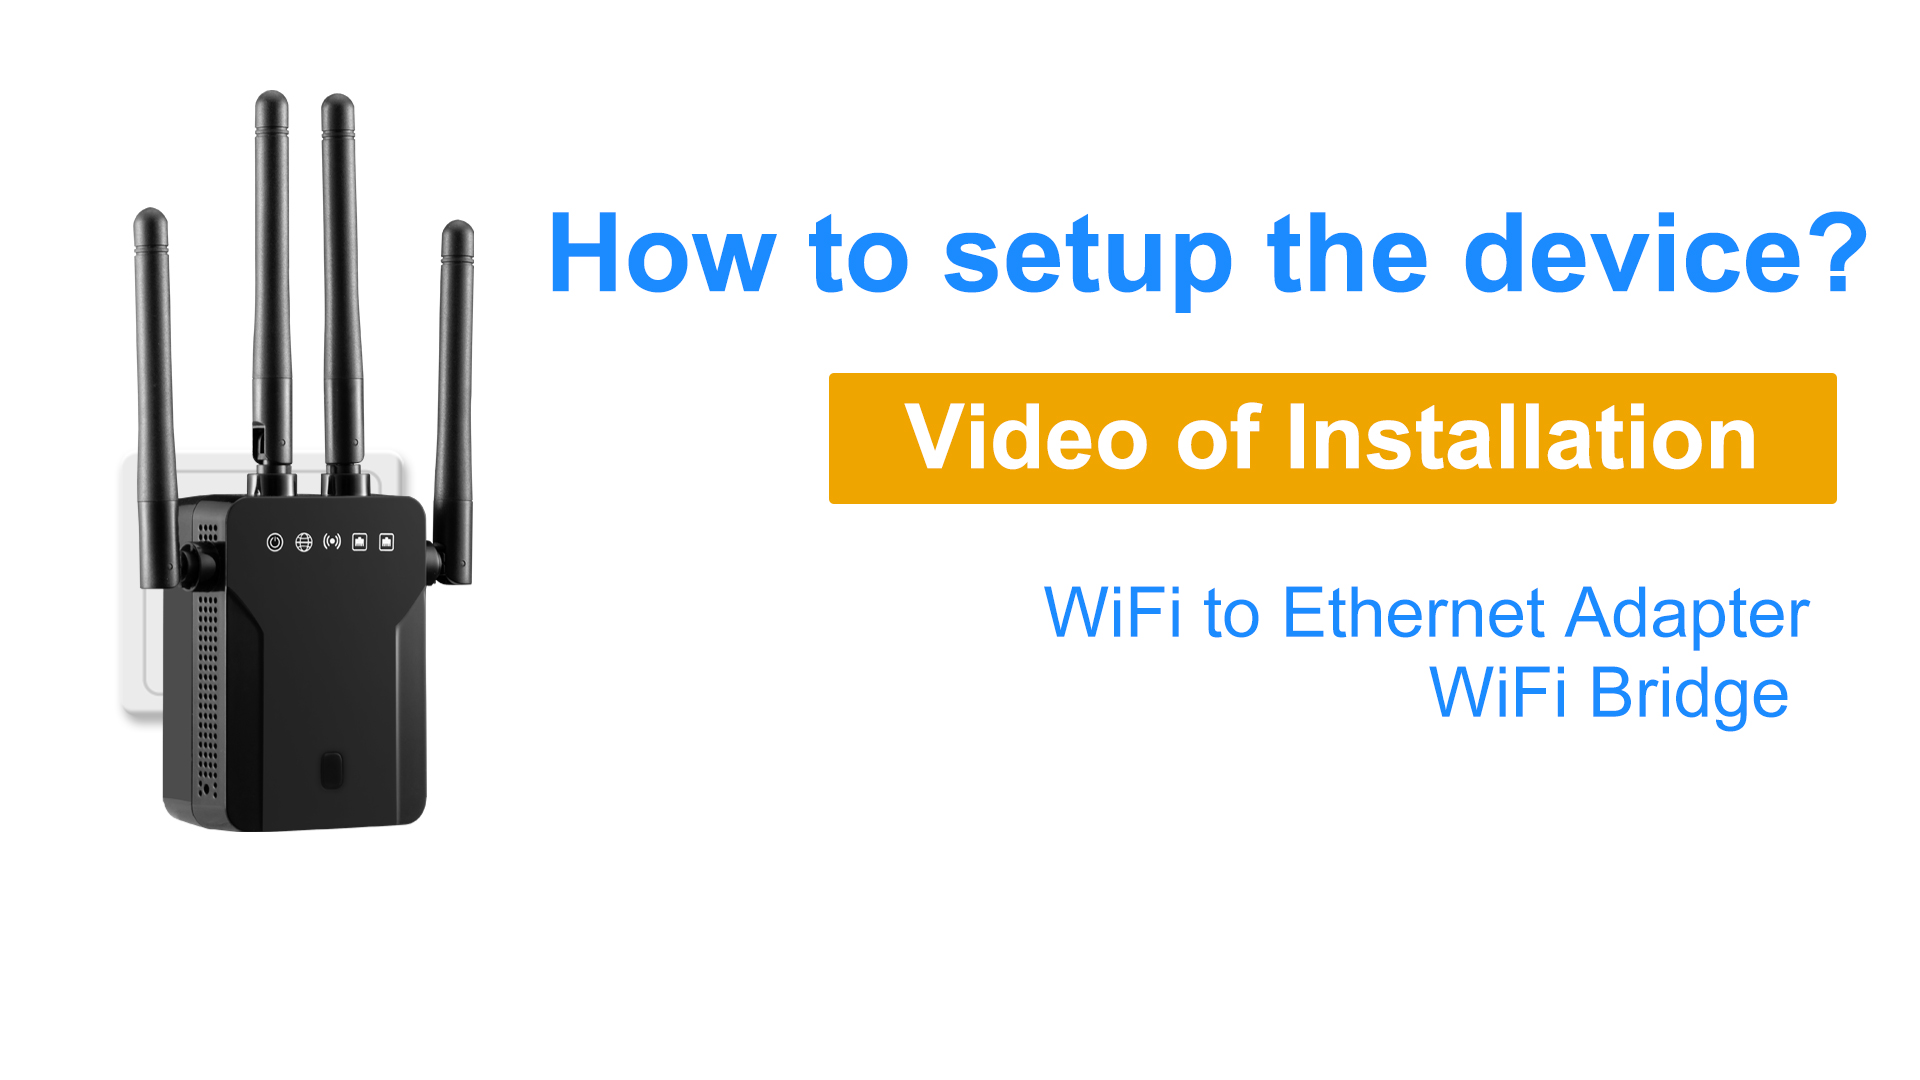 WiFi to Ethernet Adapter installation video